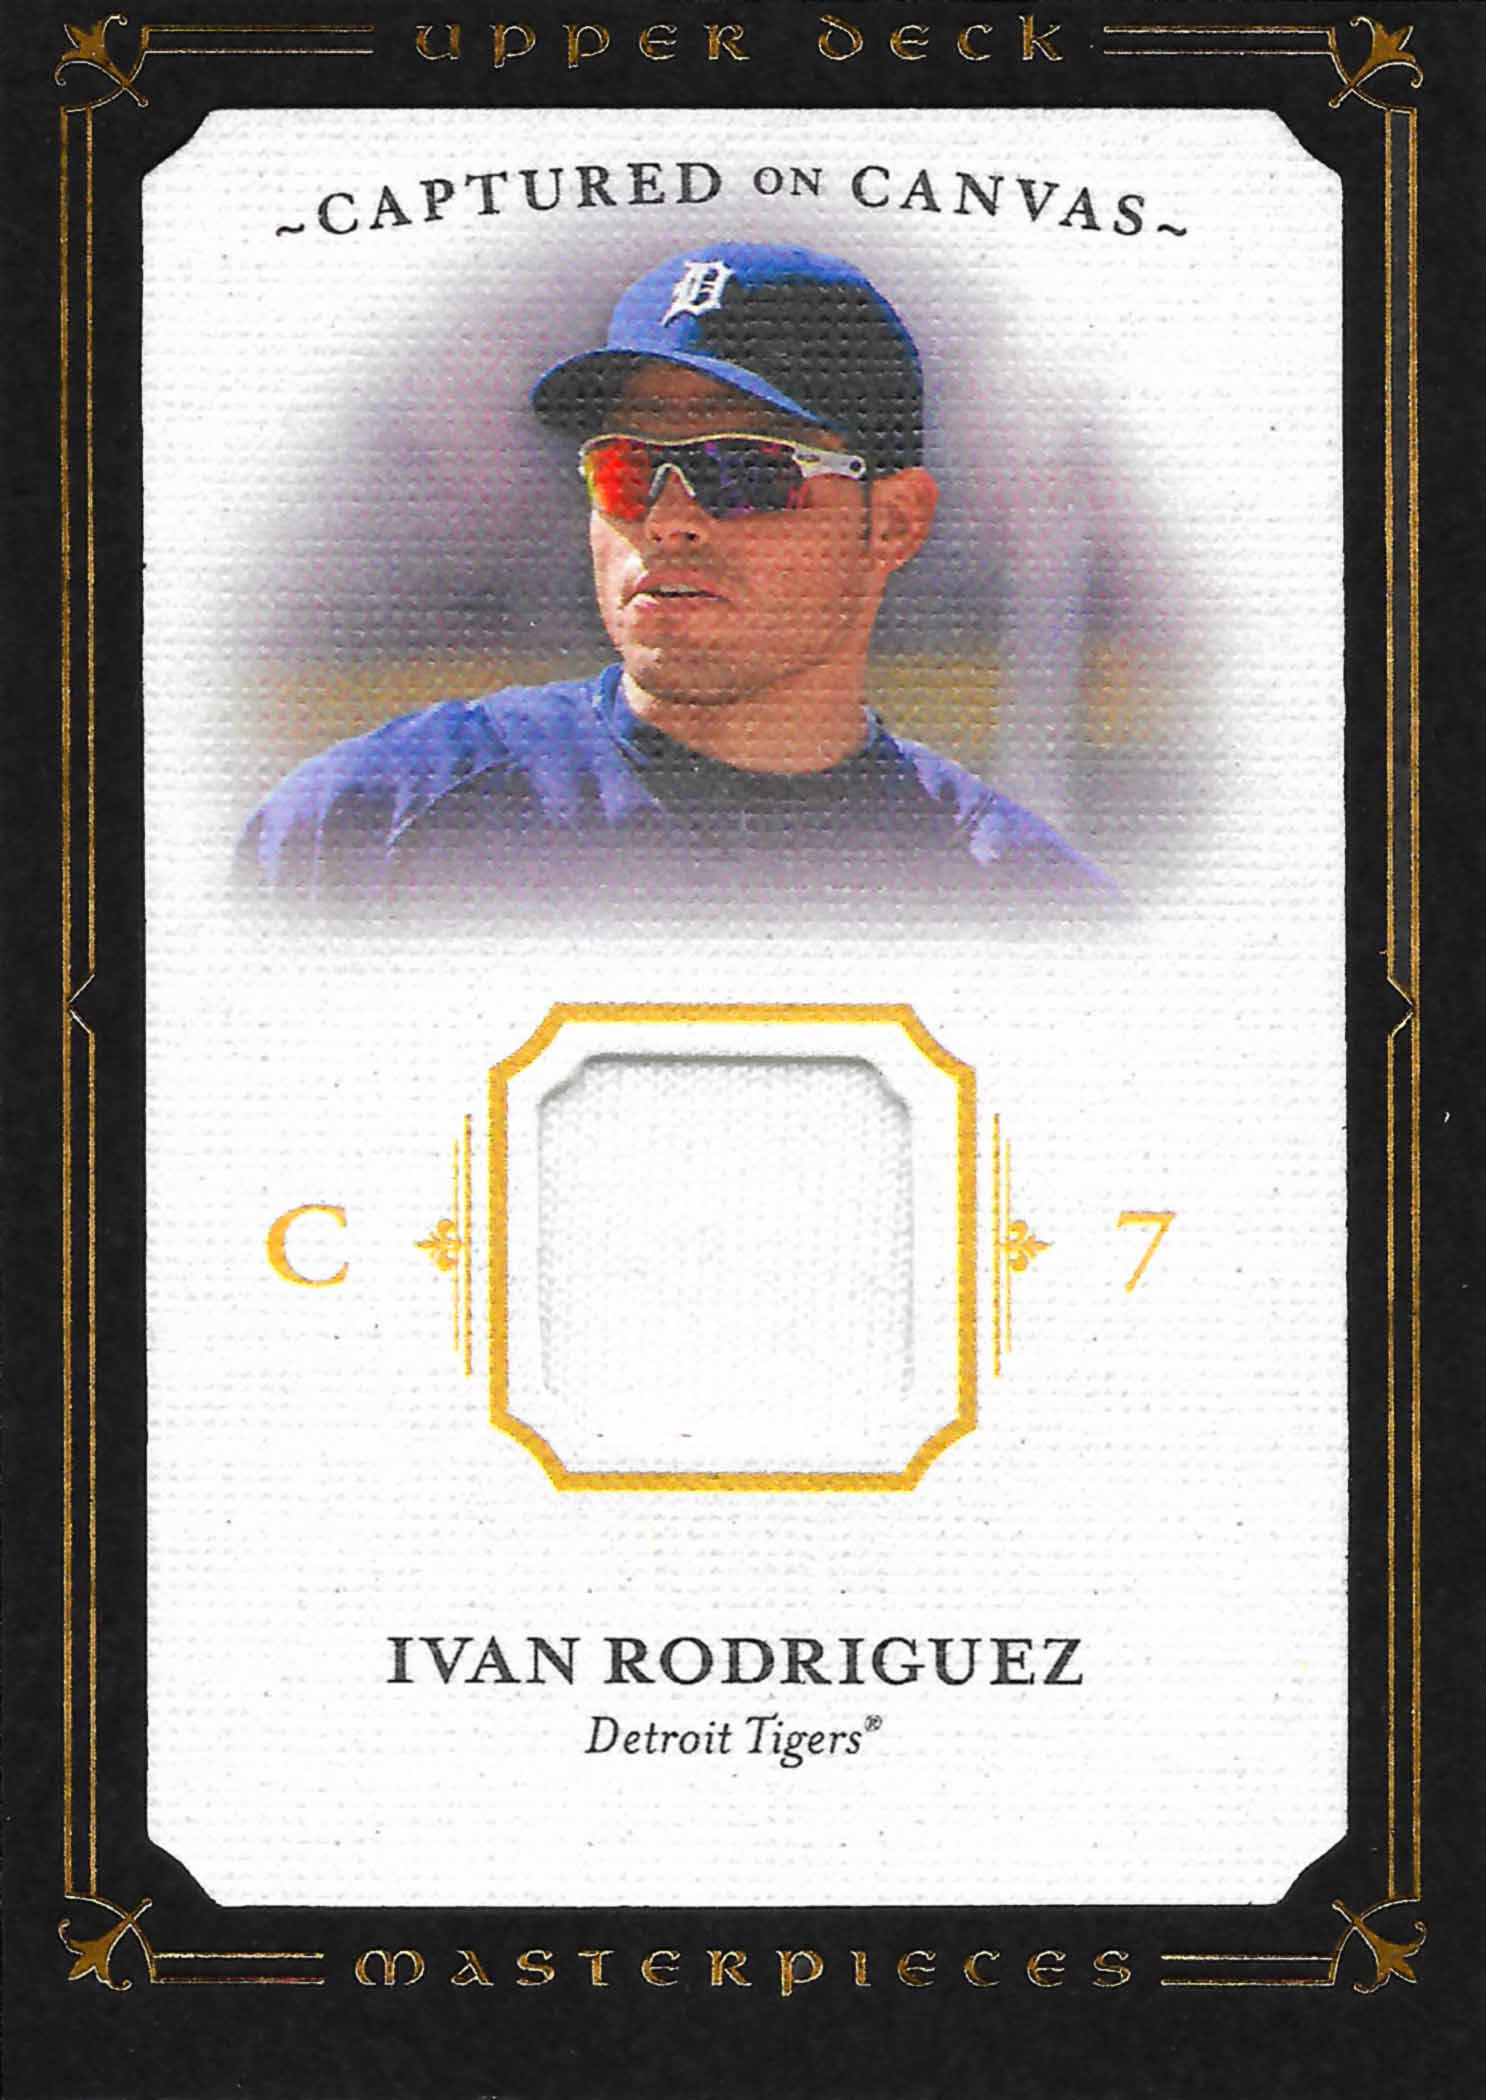 2003 Topps Tribute Contemporary Perennial All-Star Relics Bat